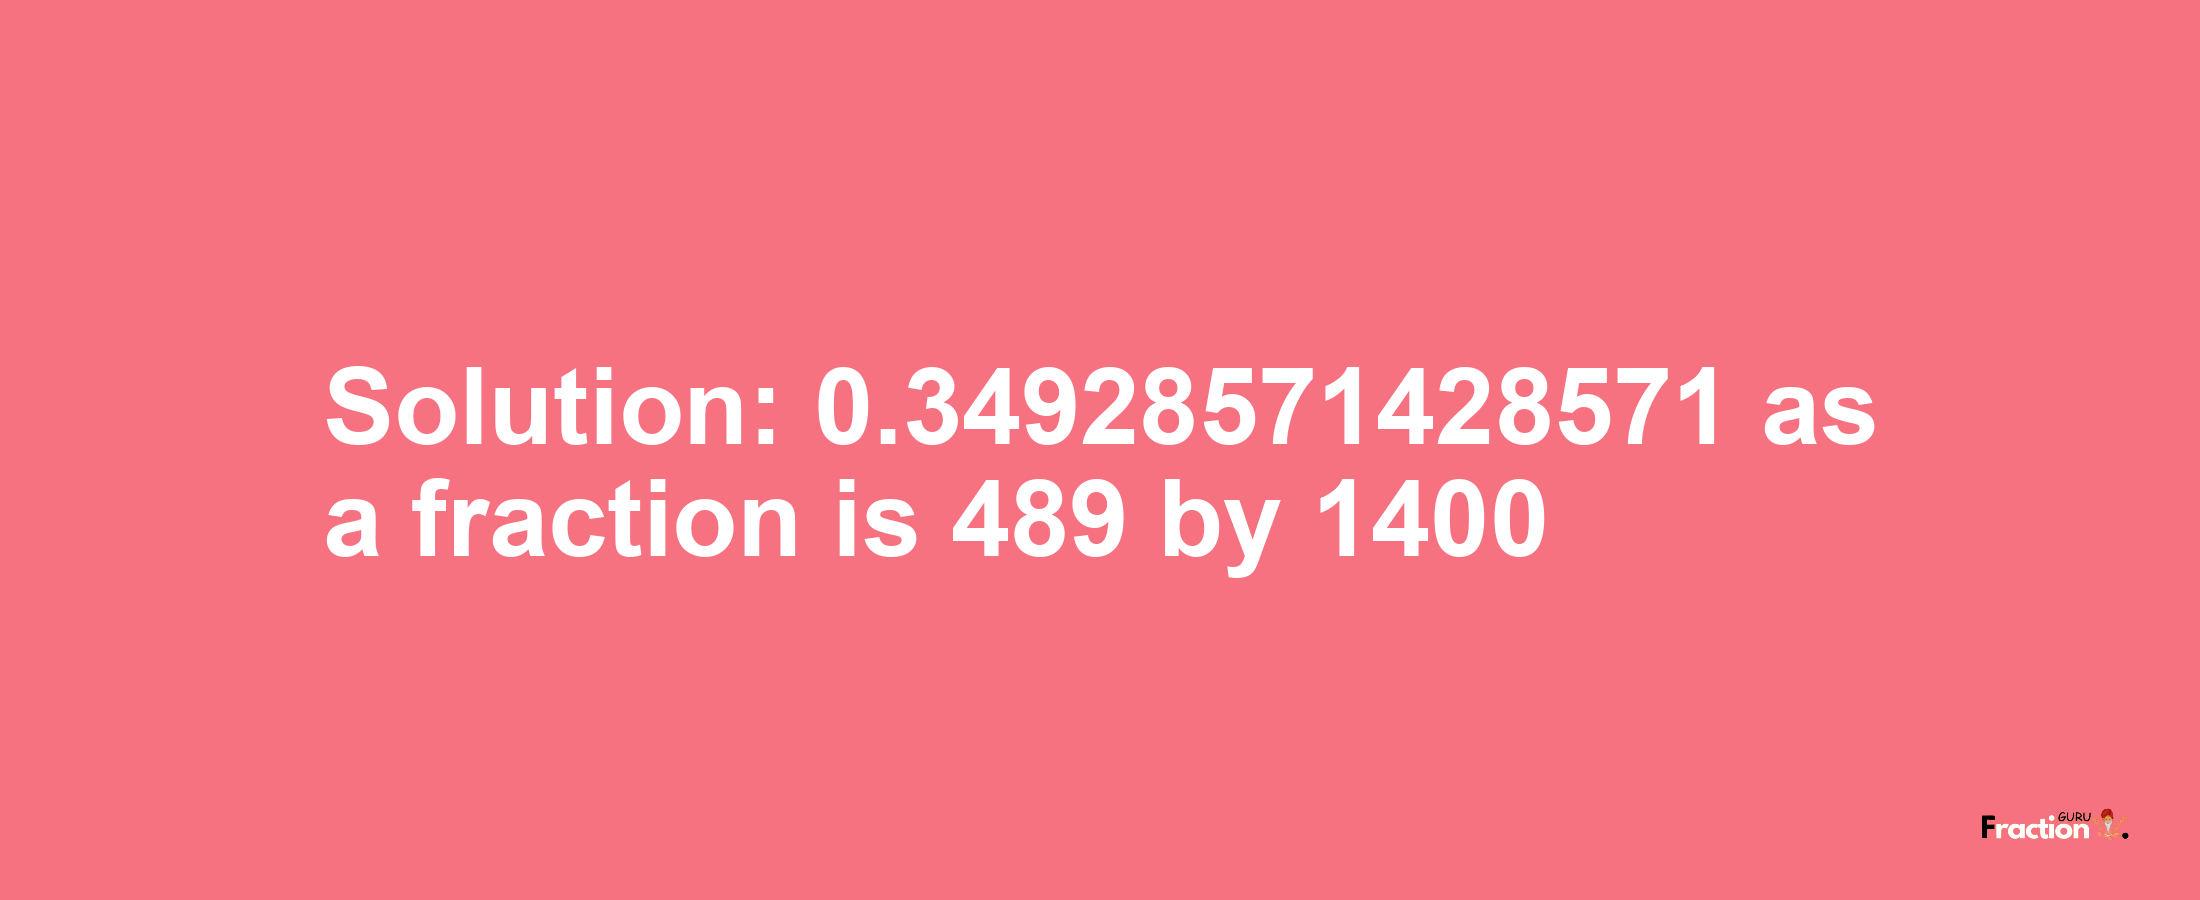 Solution:0.34928571428571 as a fraction is 489/1400